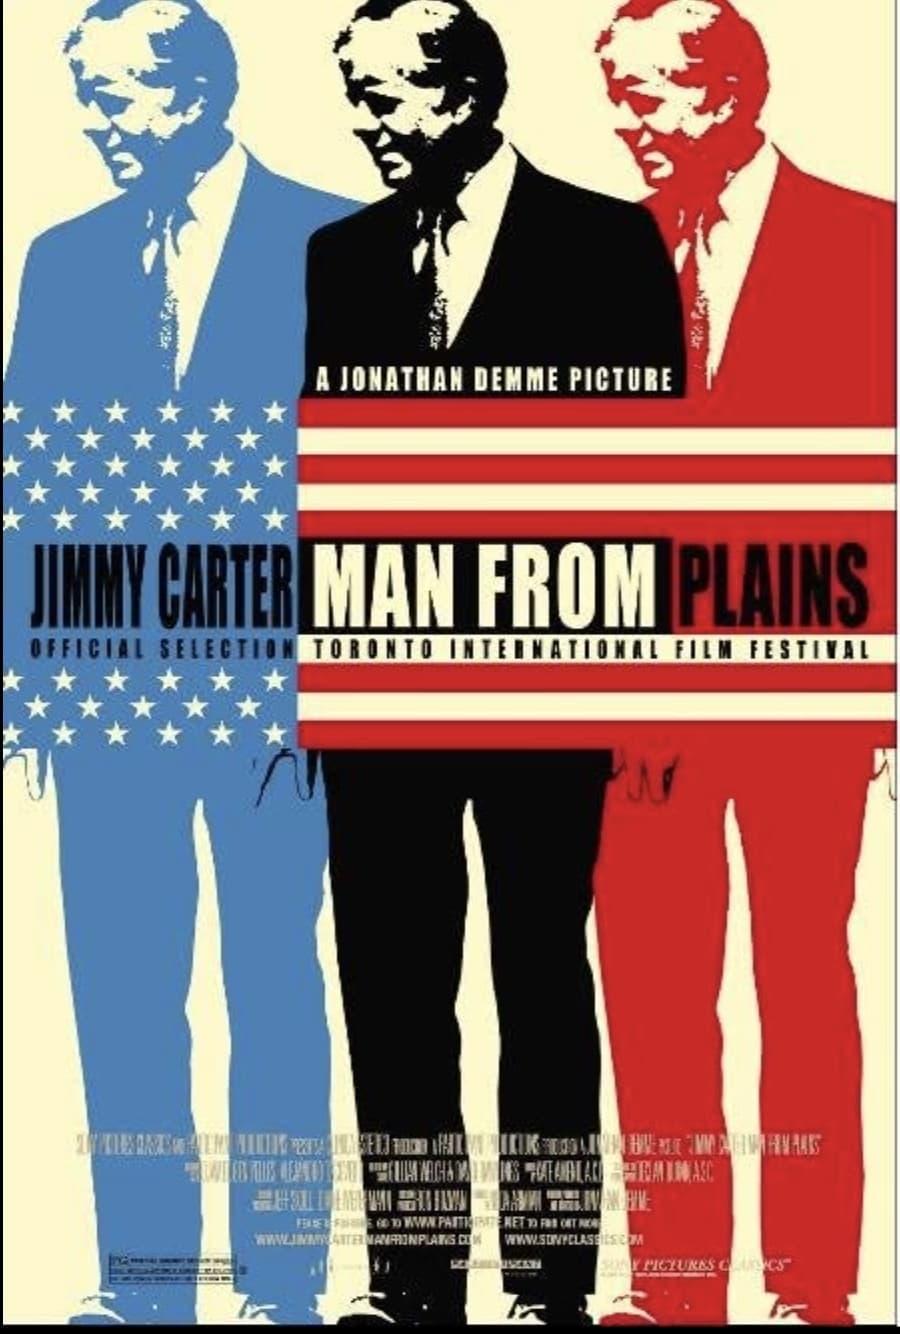 Jimmy Carter: Man from Plains poster